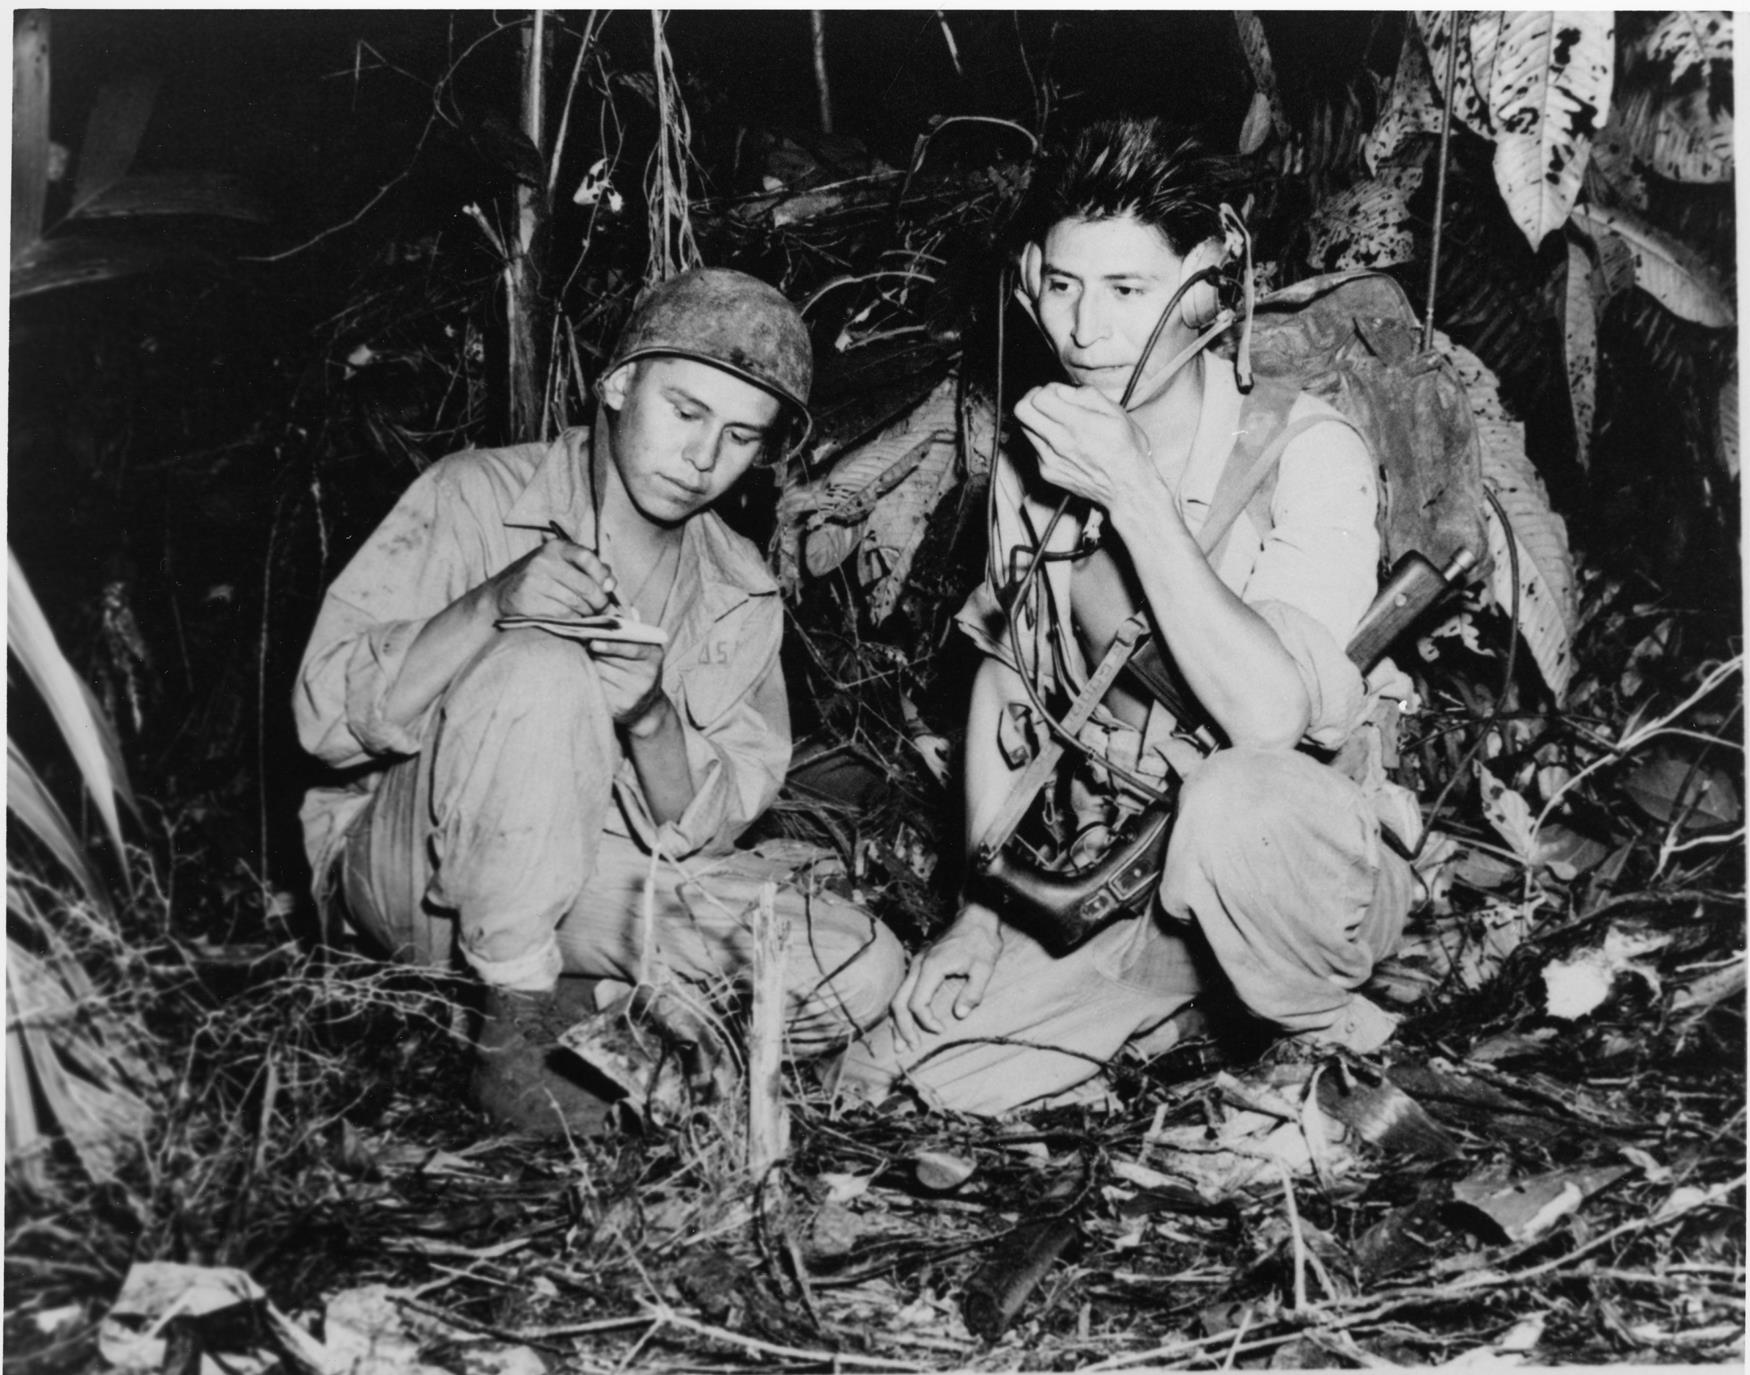 Diné [Navajo] code talkers Corporal Henry Bahe, Jr. and Private First Class George H. Kirk. Bougainville, South Pacific, December 1943. (Photo Credit: National Archives and Records Administration 127-MN-69889-B)